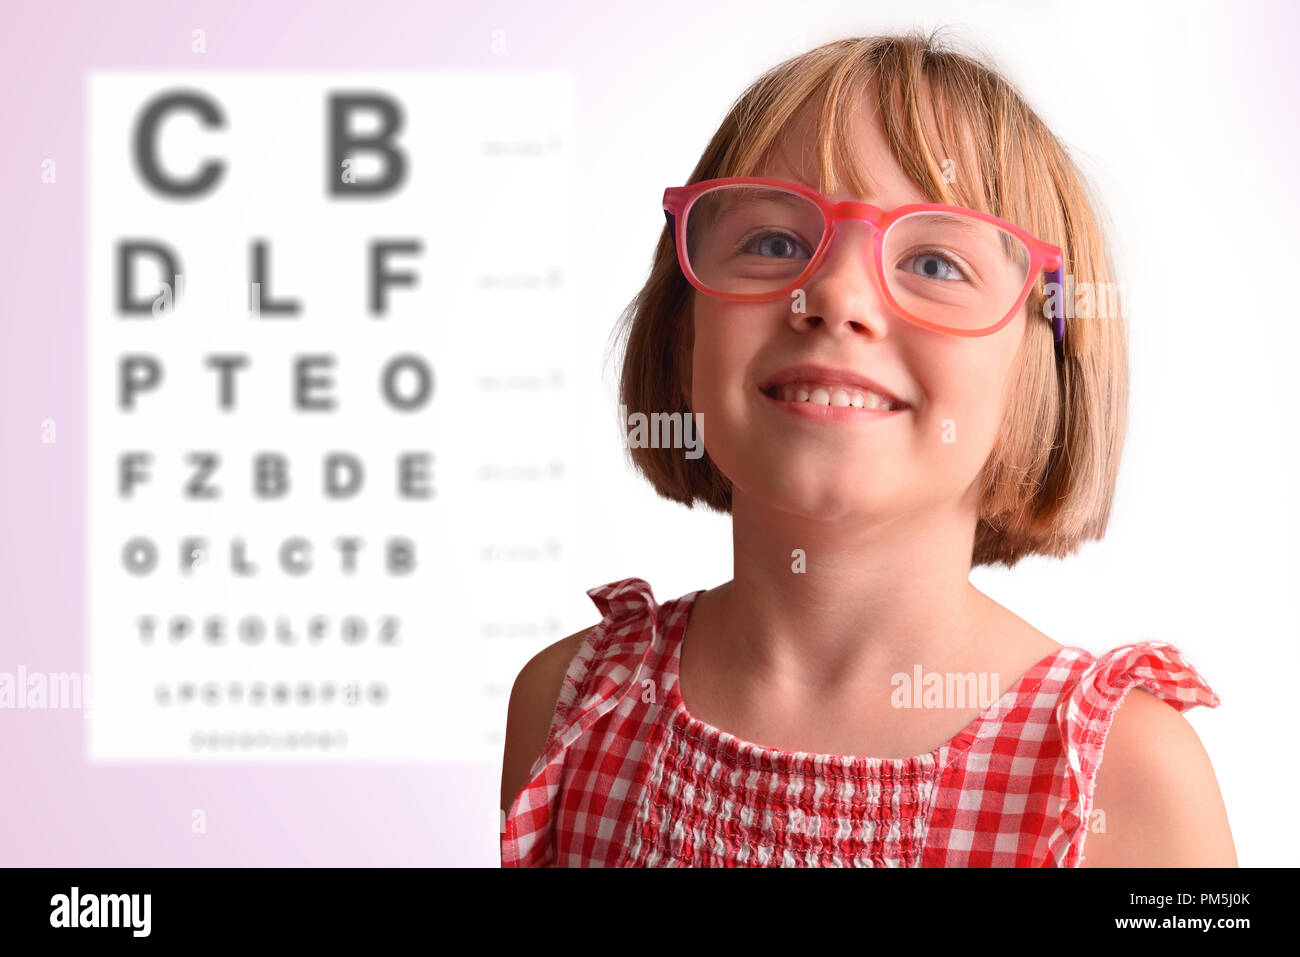 Child eye check with girl with glasses and letter board in the background. Concept of eye revision. Horizontal composition Stock Photo